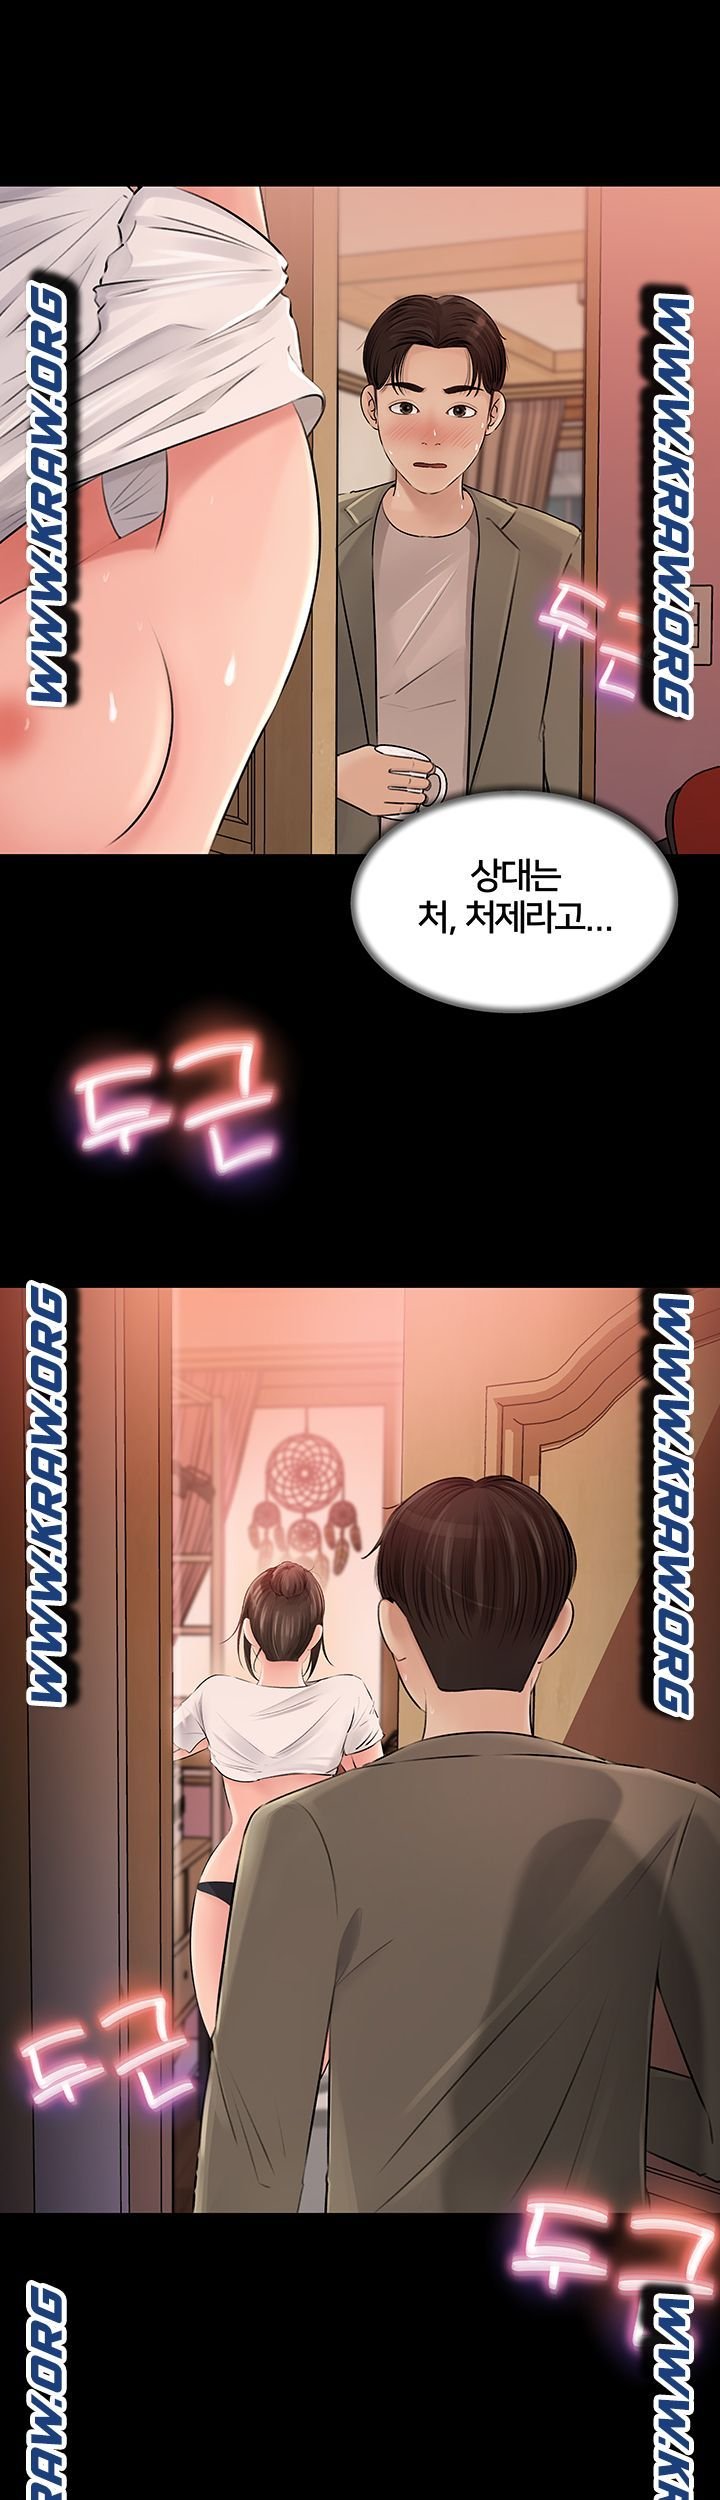 in-my-sister-in-law-raw-chap-3-6